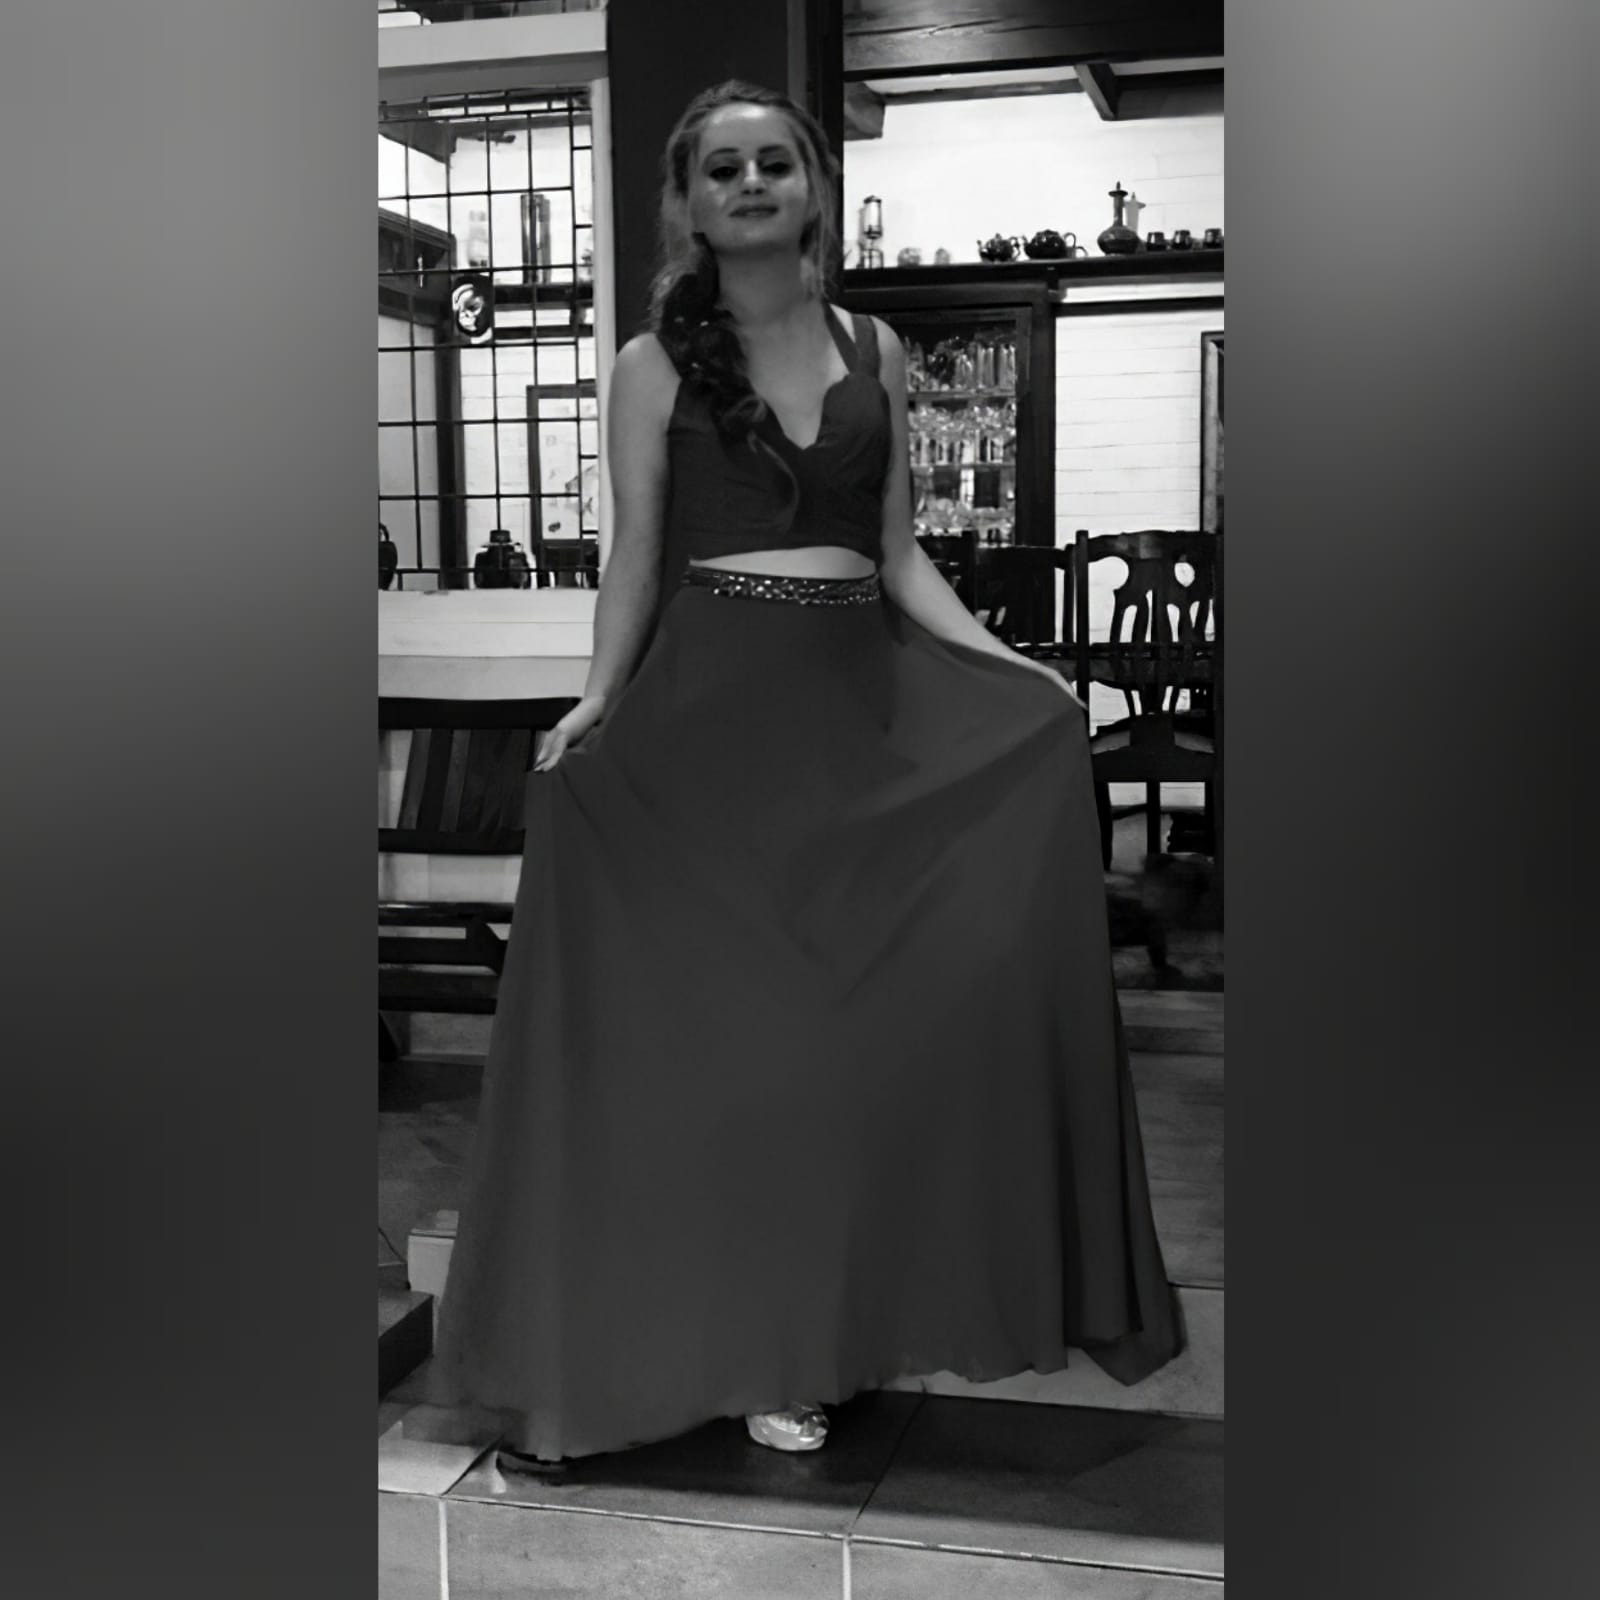 Olive green 2 piece matric dance dress 6 olive green 2 piece matric dance dress. Flowy long chiffon shirt with a little train and waistband detailed with silver beads. Pleated crop top with a rounded deep neckline , backless design with strap detail.